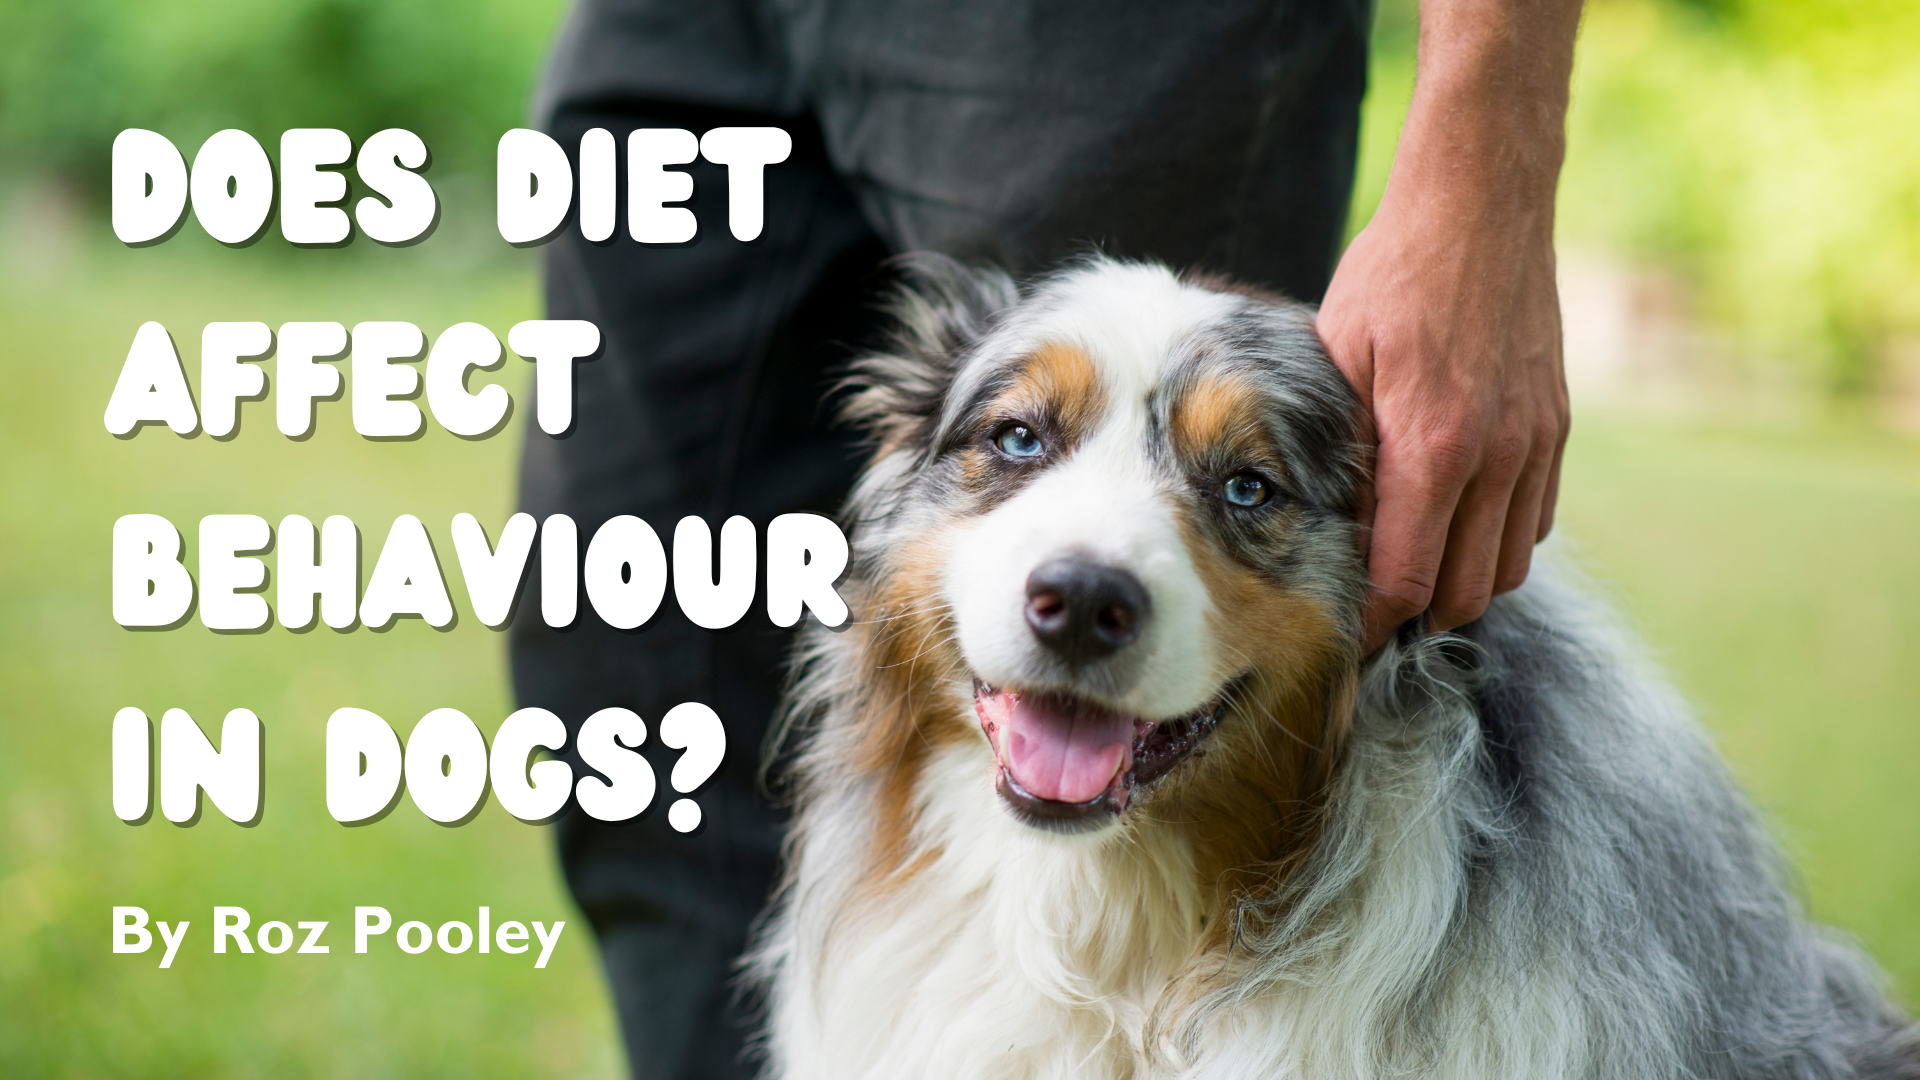 Does diet affect behaviour in dogs?